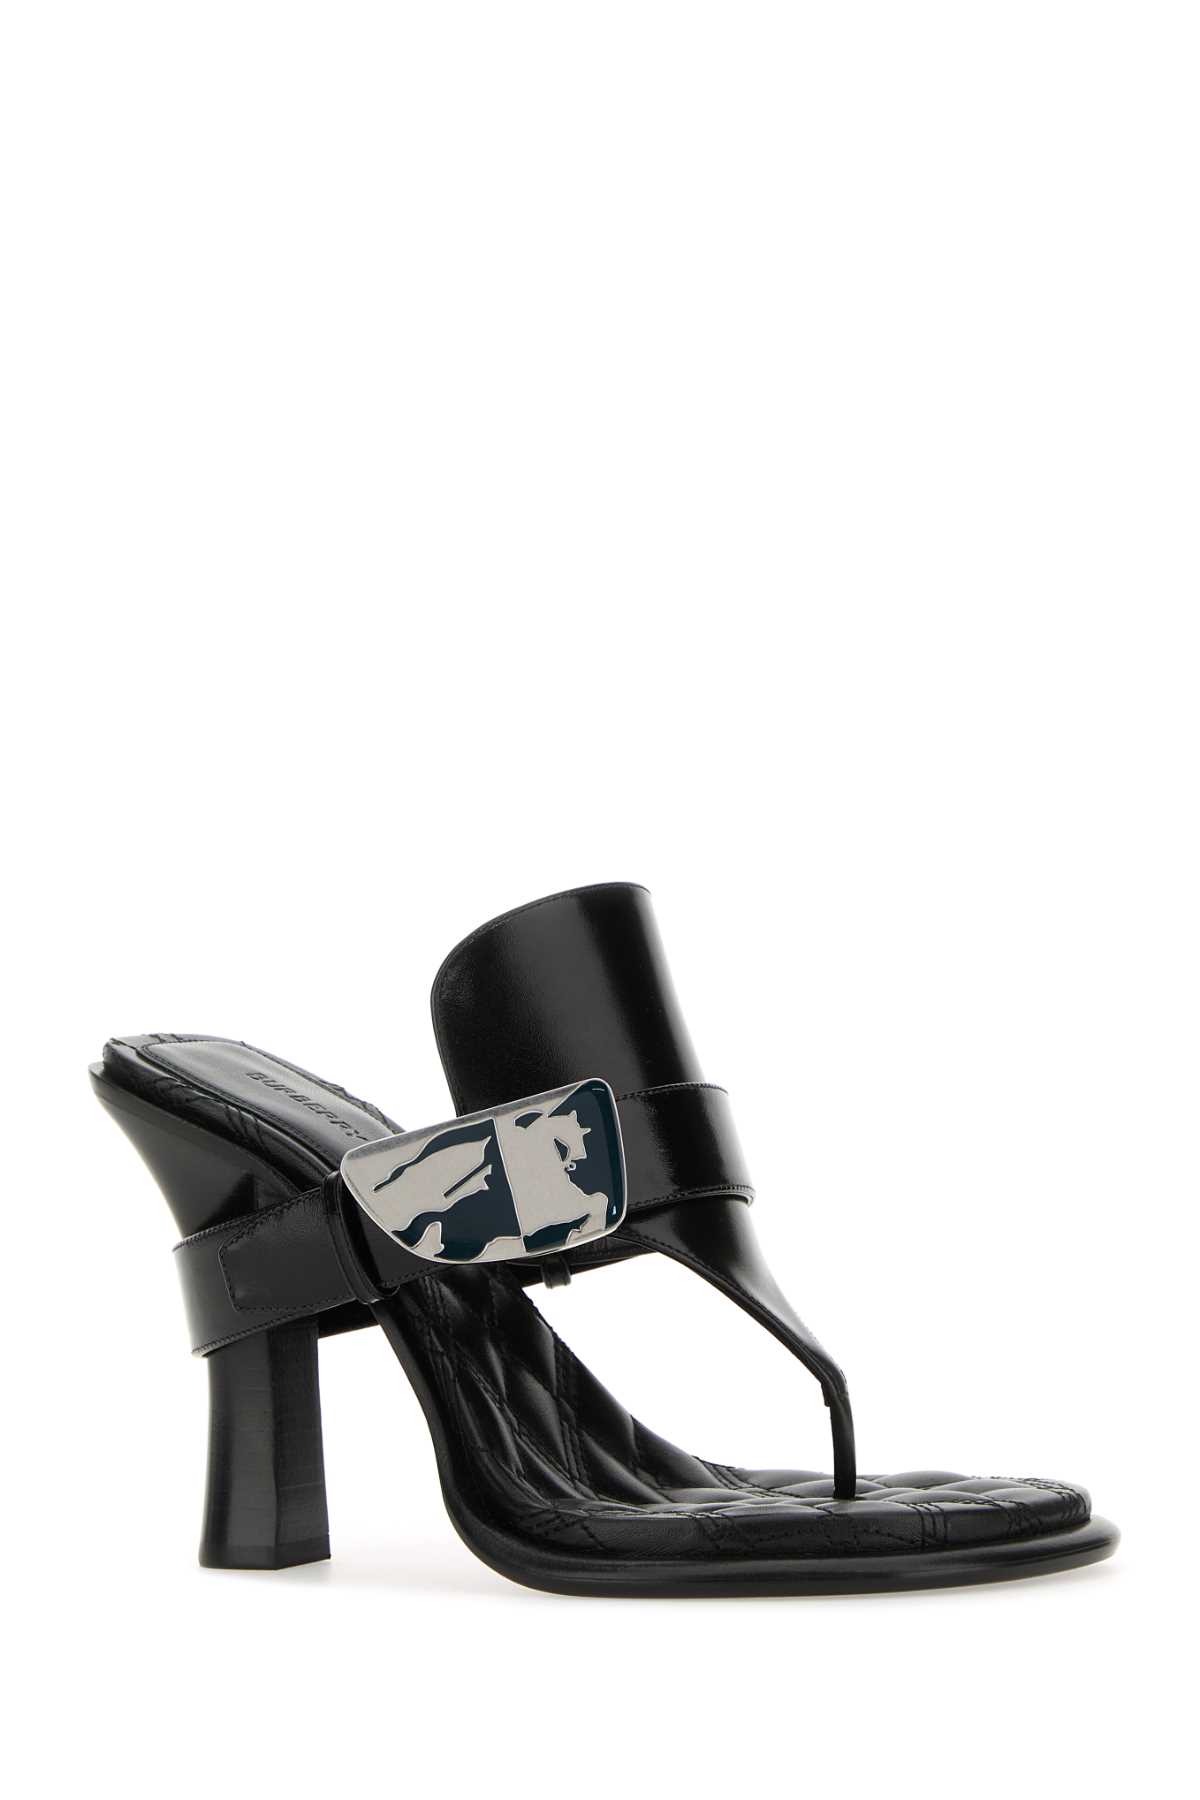 Shop Burberry Black Leather Bay Thong Mules